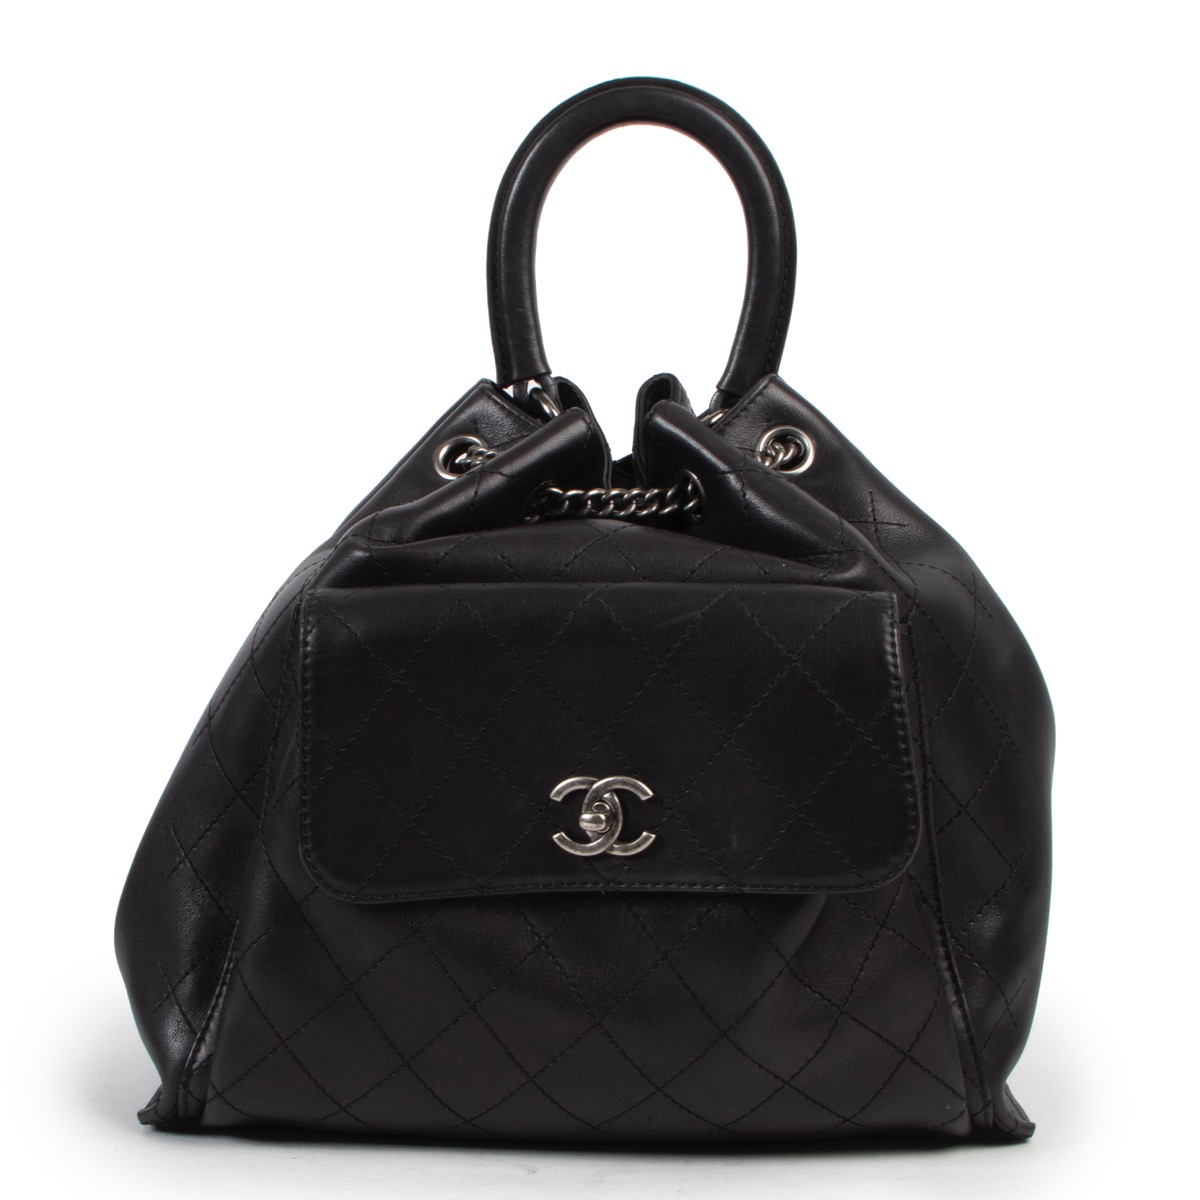 Chanel Black Stitched Leather Urban Luxury Drawstring Backpack